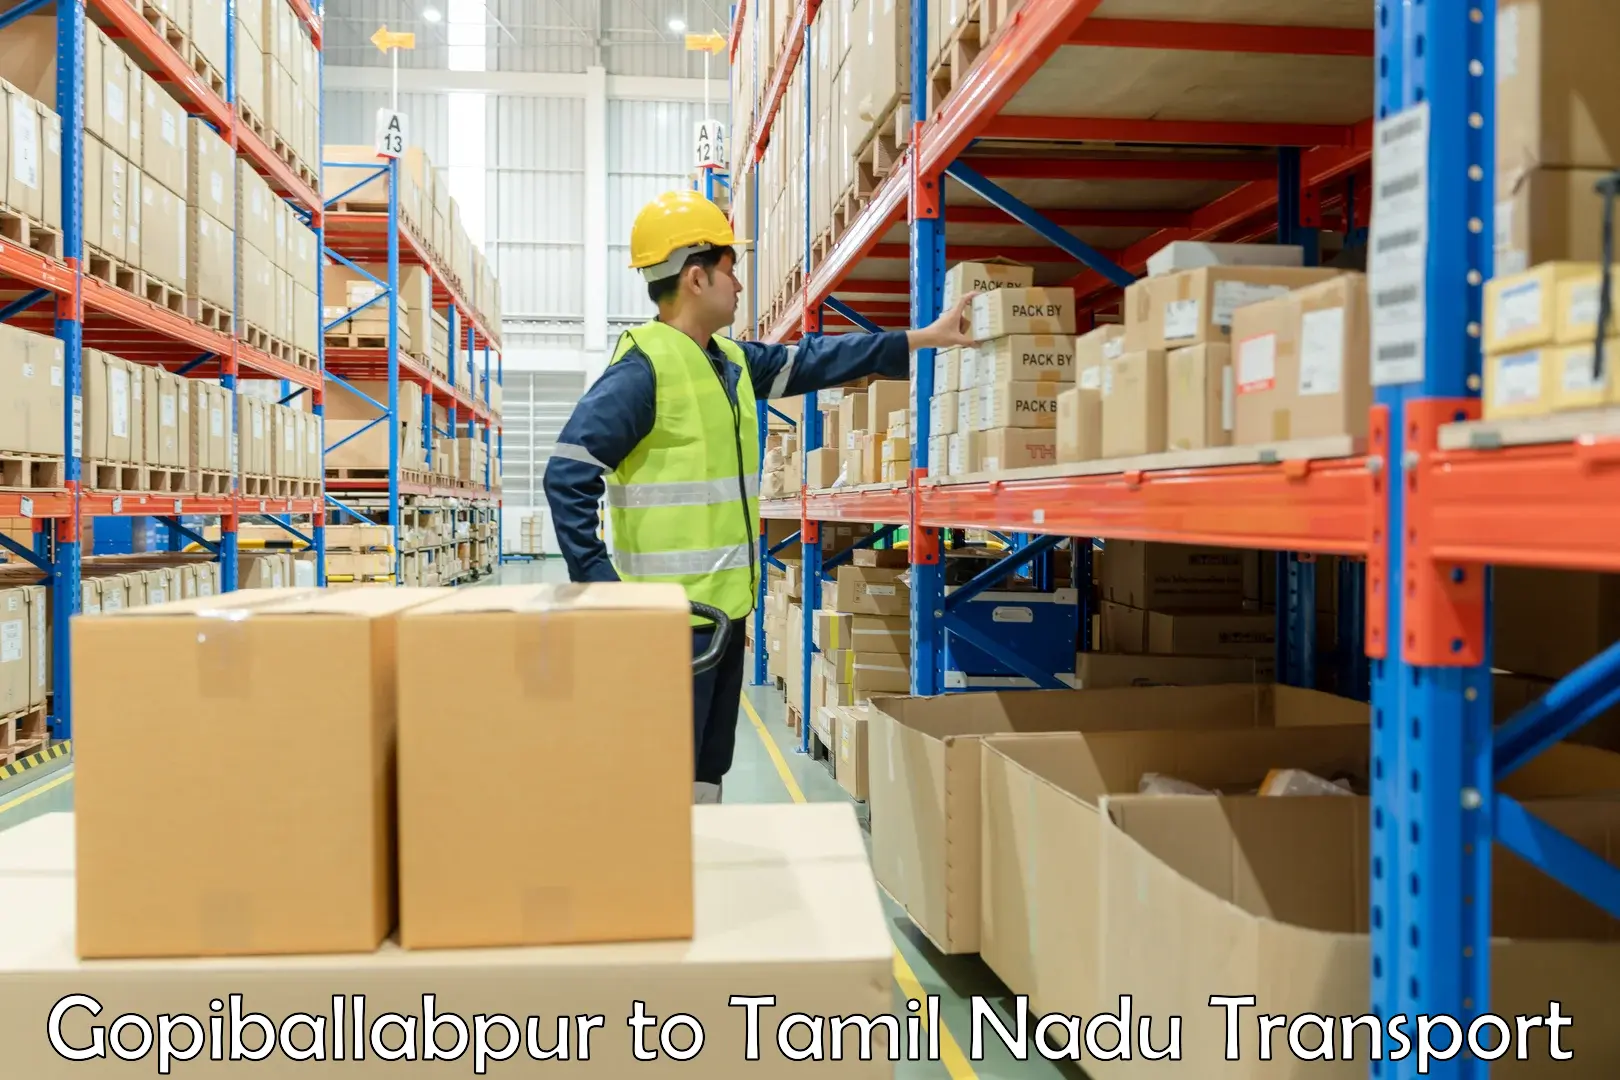 Luggage transport services Gopiballabpur to Ooty